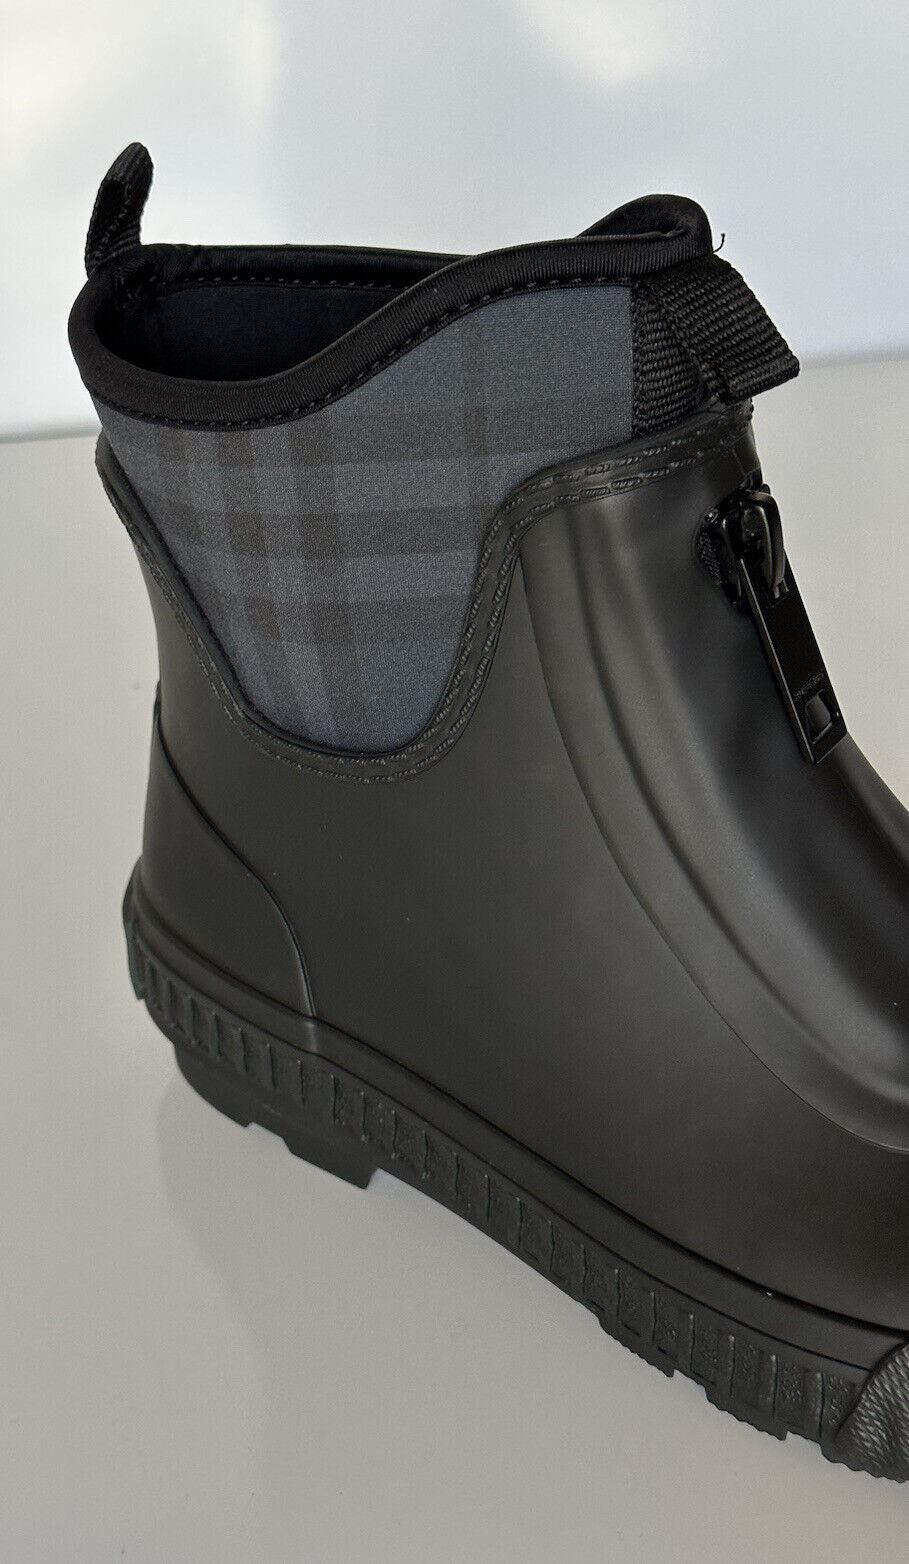 NIB Burberry Rubber  Women's Black/Charcoal Ankle Boots 8 US (38 Euro) 8045835